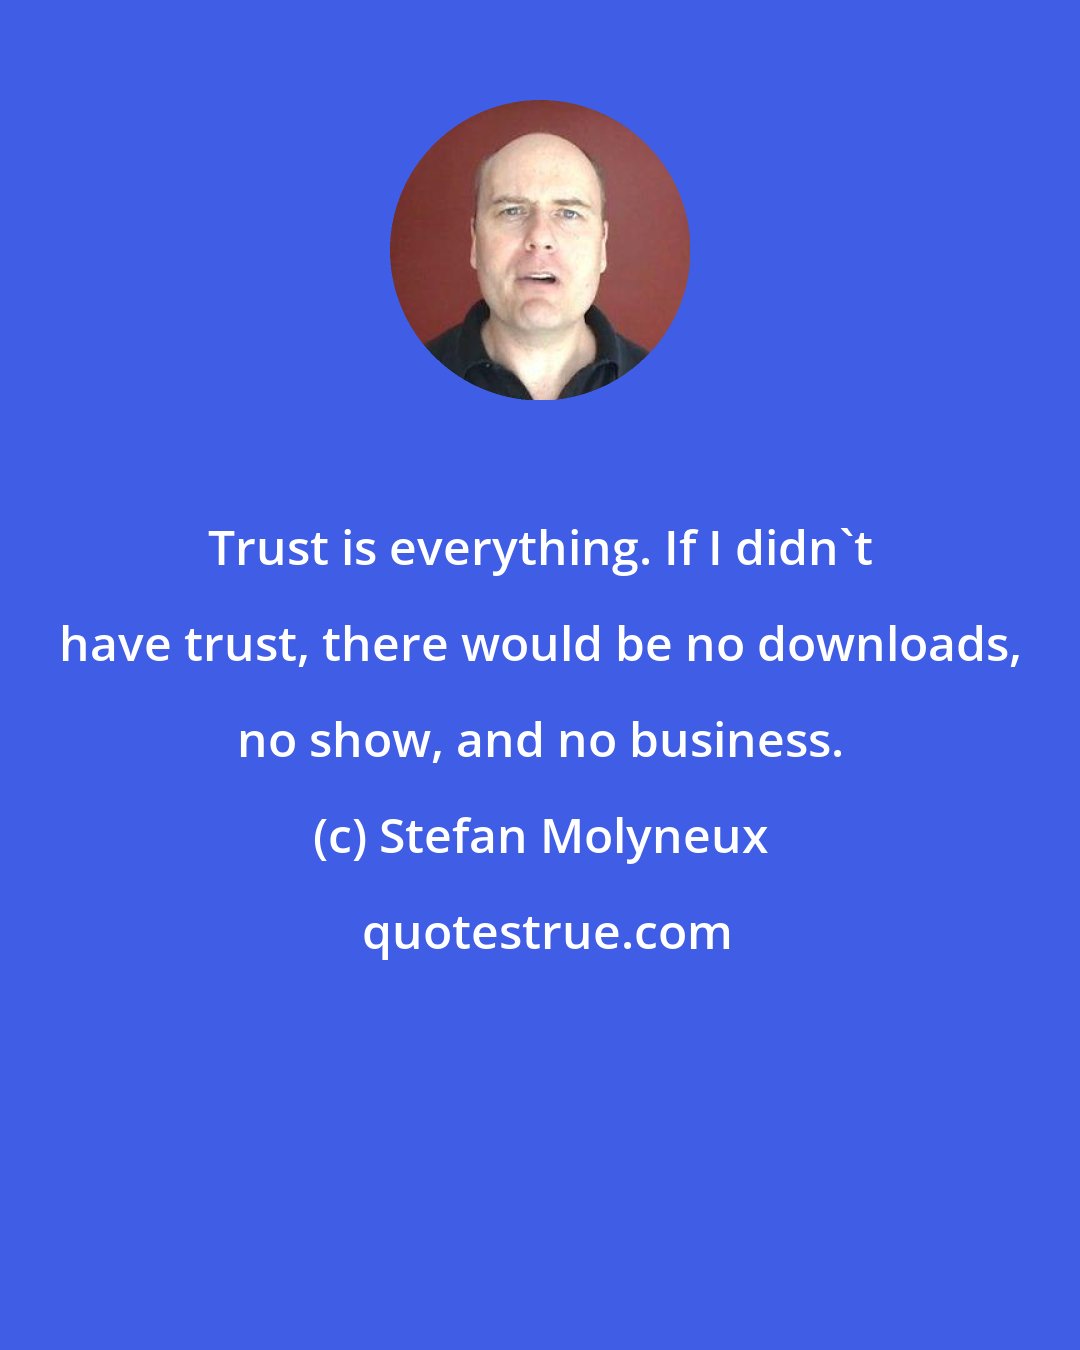 Stefan Molyneux: Trust is everything. If I didn't have trust, there would be no downloads, no show, and no business.